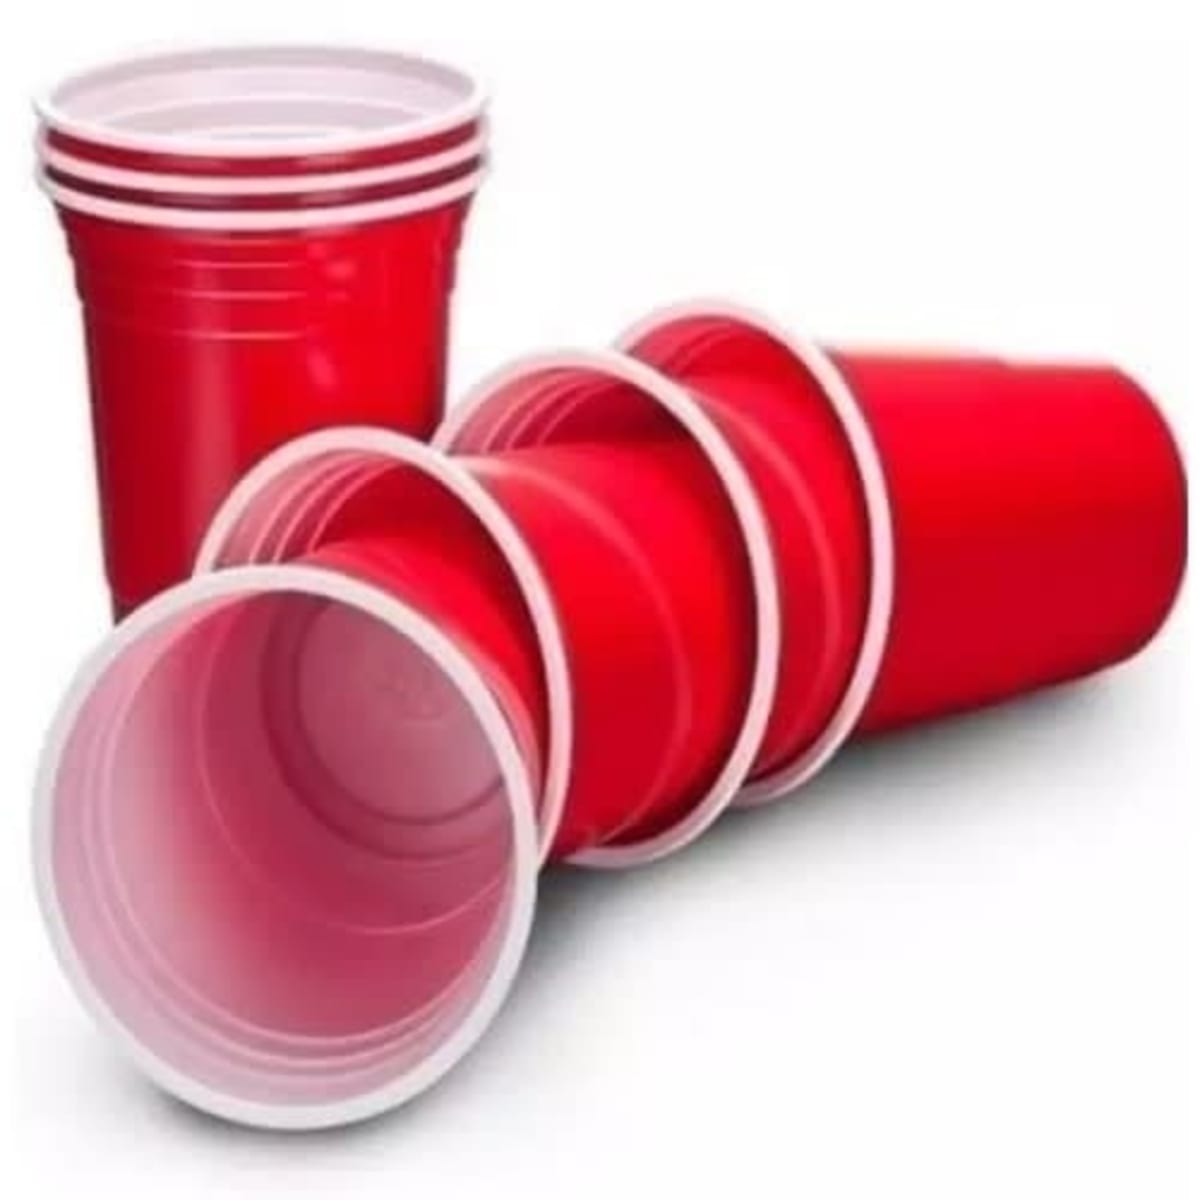 50pcs Disposable Party Plastic Cups Red Drinking Cups Party Cup